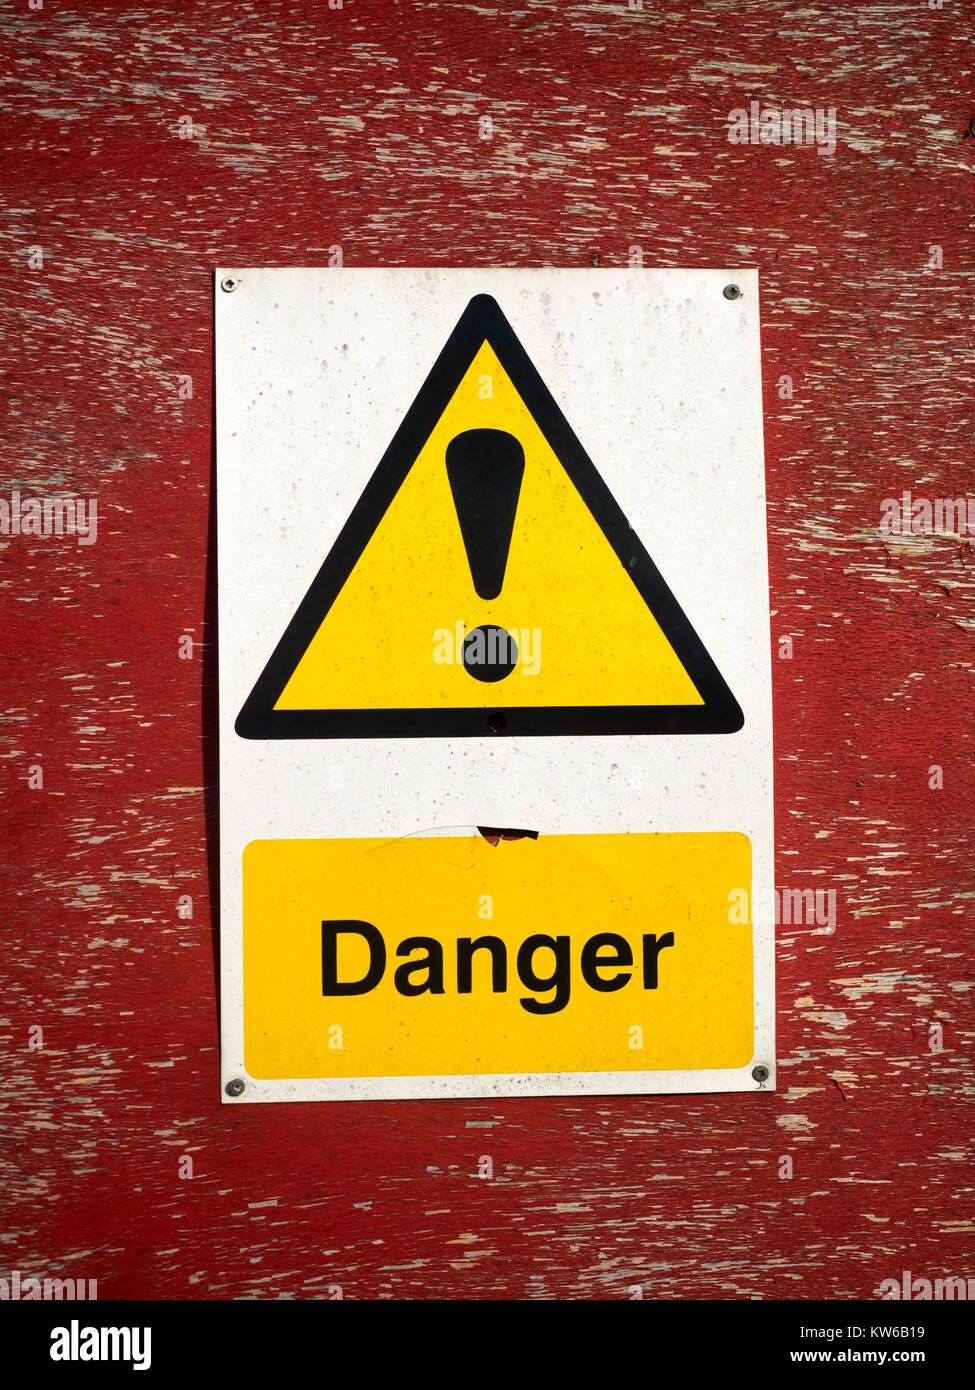 SOUTHEND-ON-SEA, ESSEX, UK - OCTOBER 27, 2017: Health and Safety Warning Sign - Danger Stock Photo